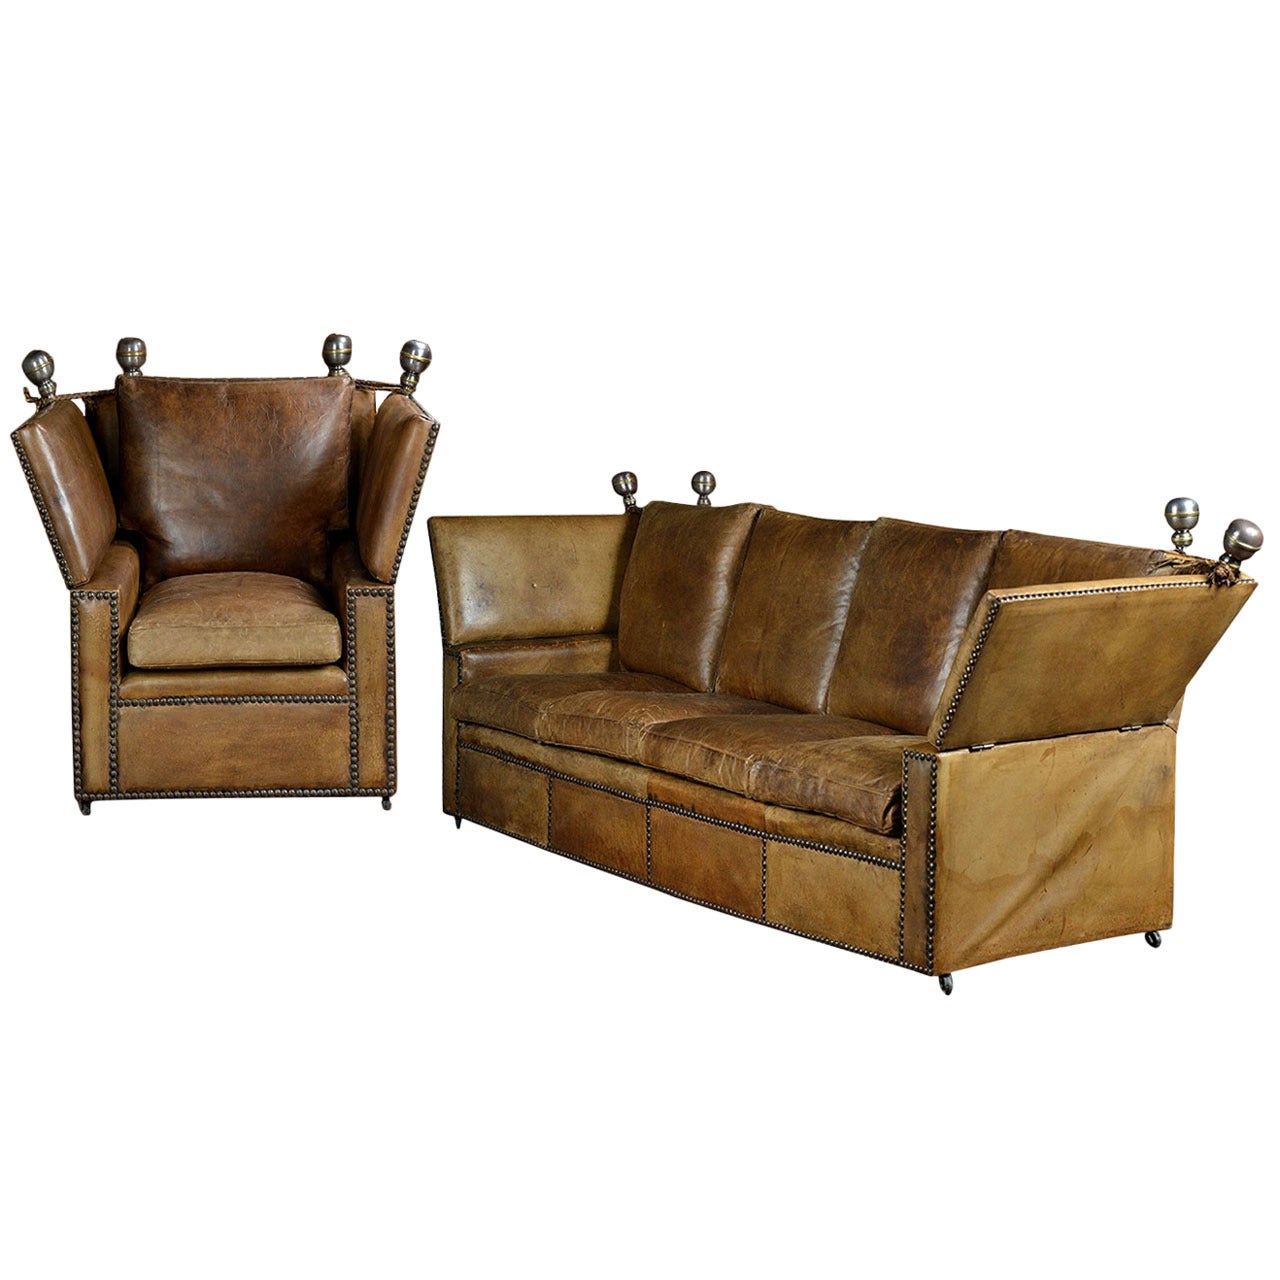 Antique French Leather Knole Sofa and Chair For Sale